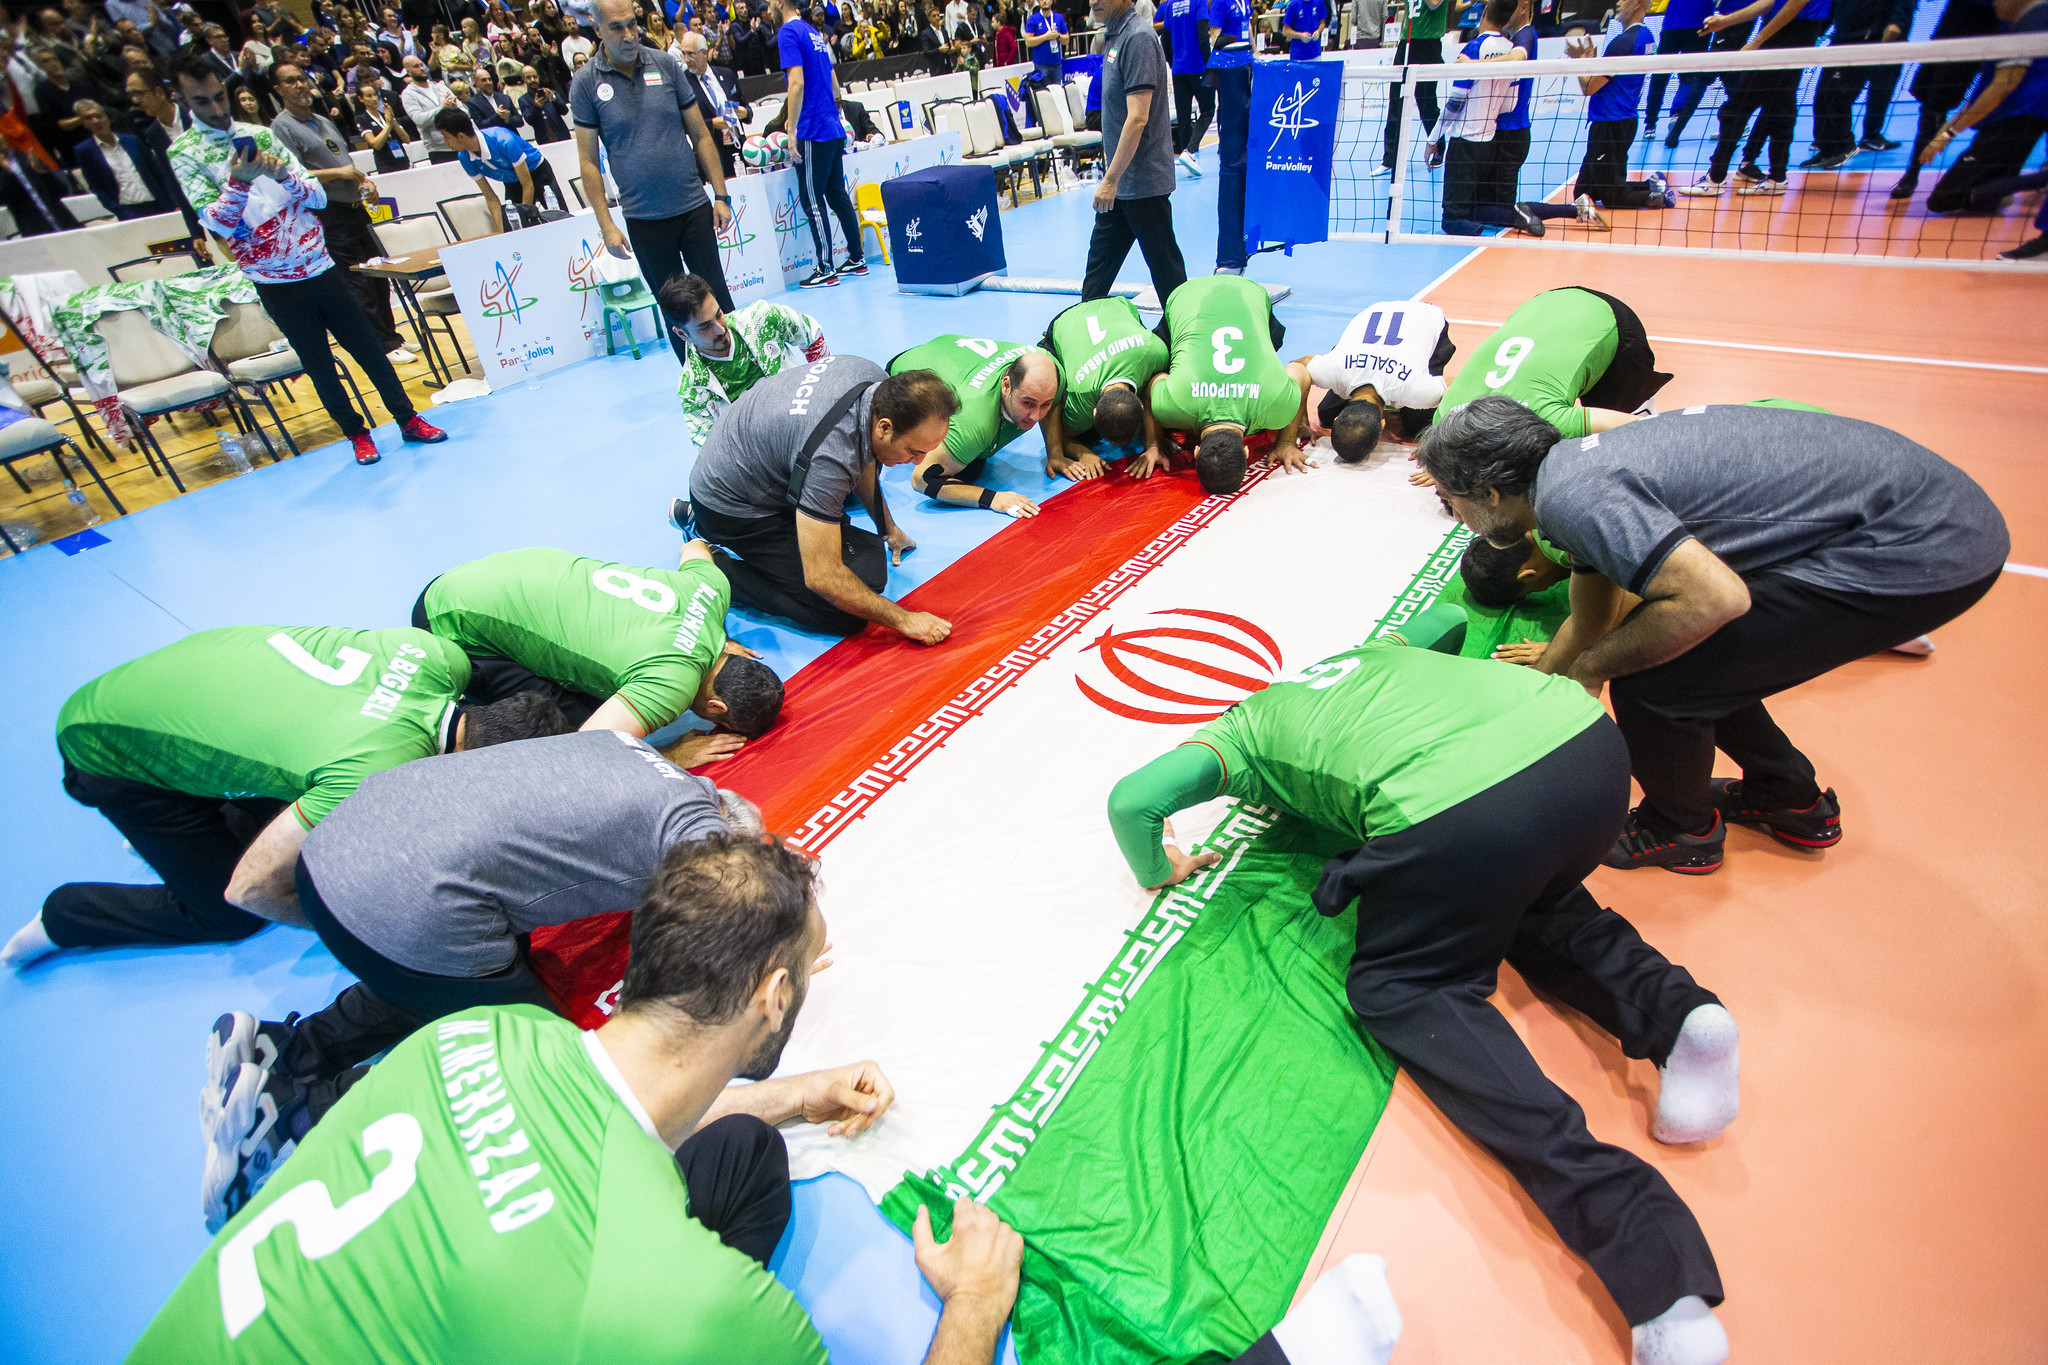 Iran win eighth men's title at Sitting Volleyball World Championships and Brazil's women earn first